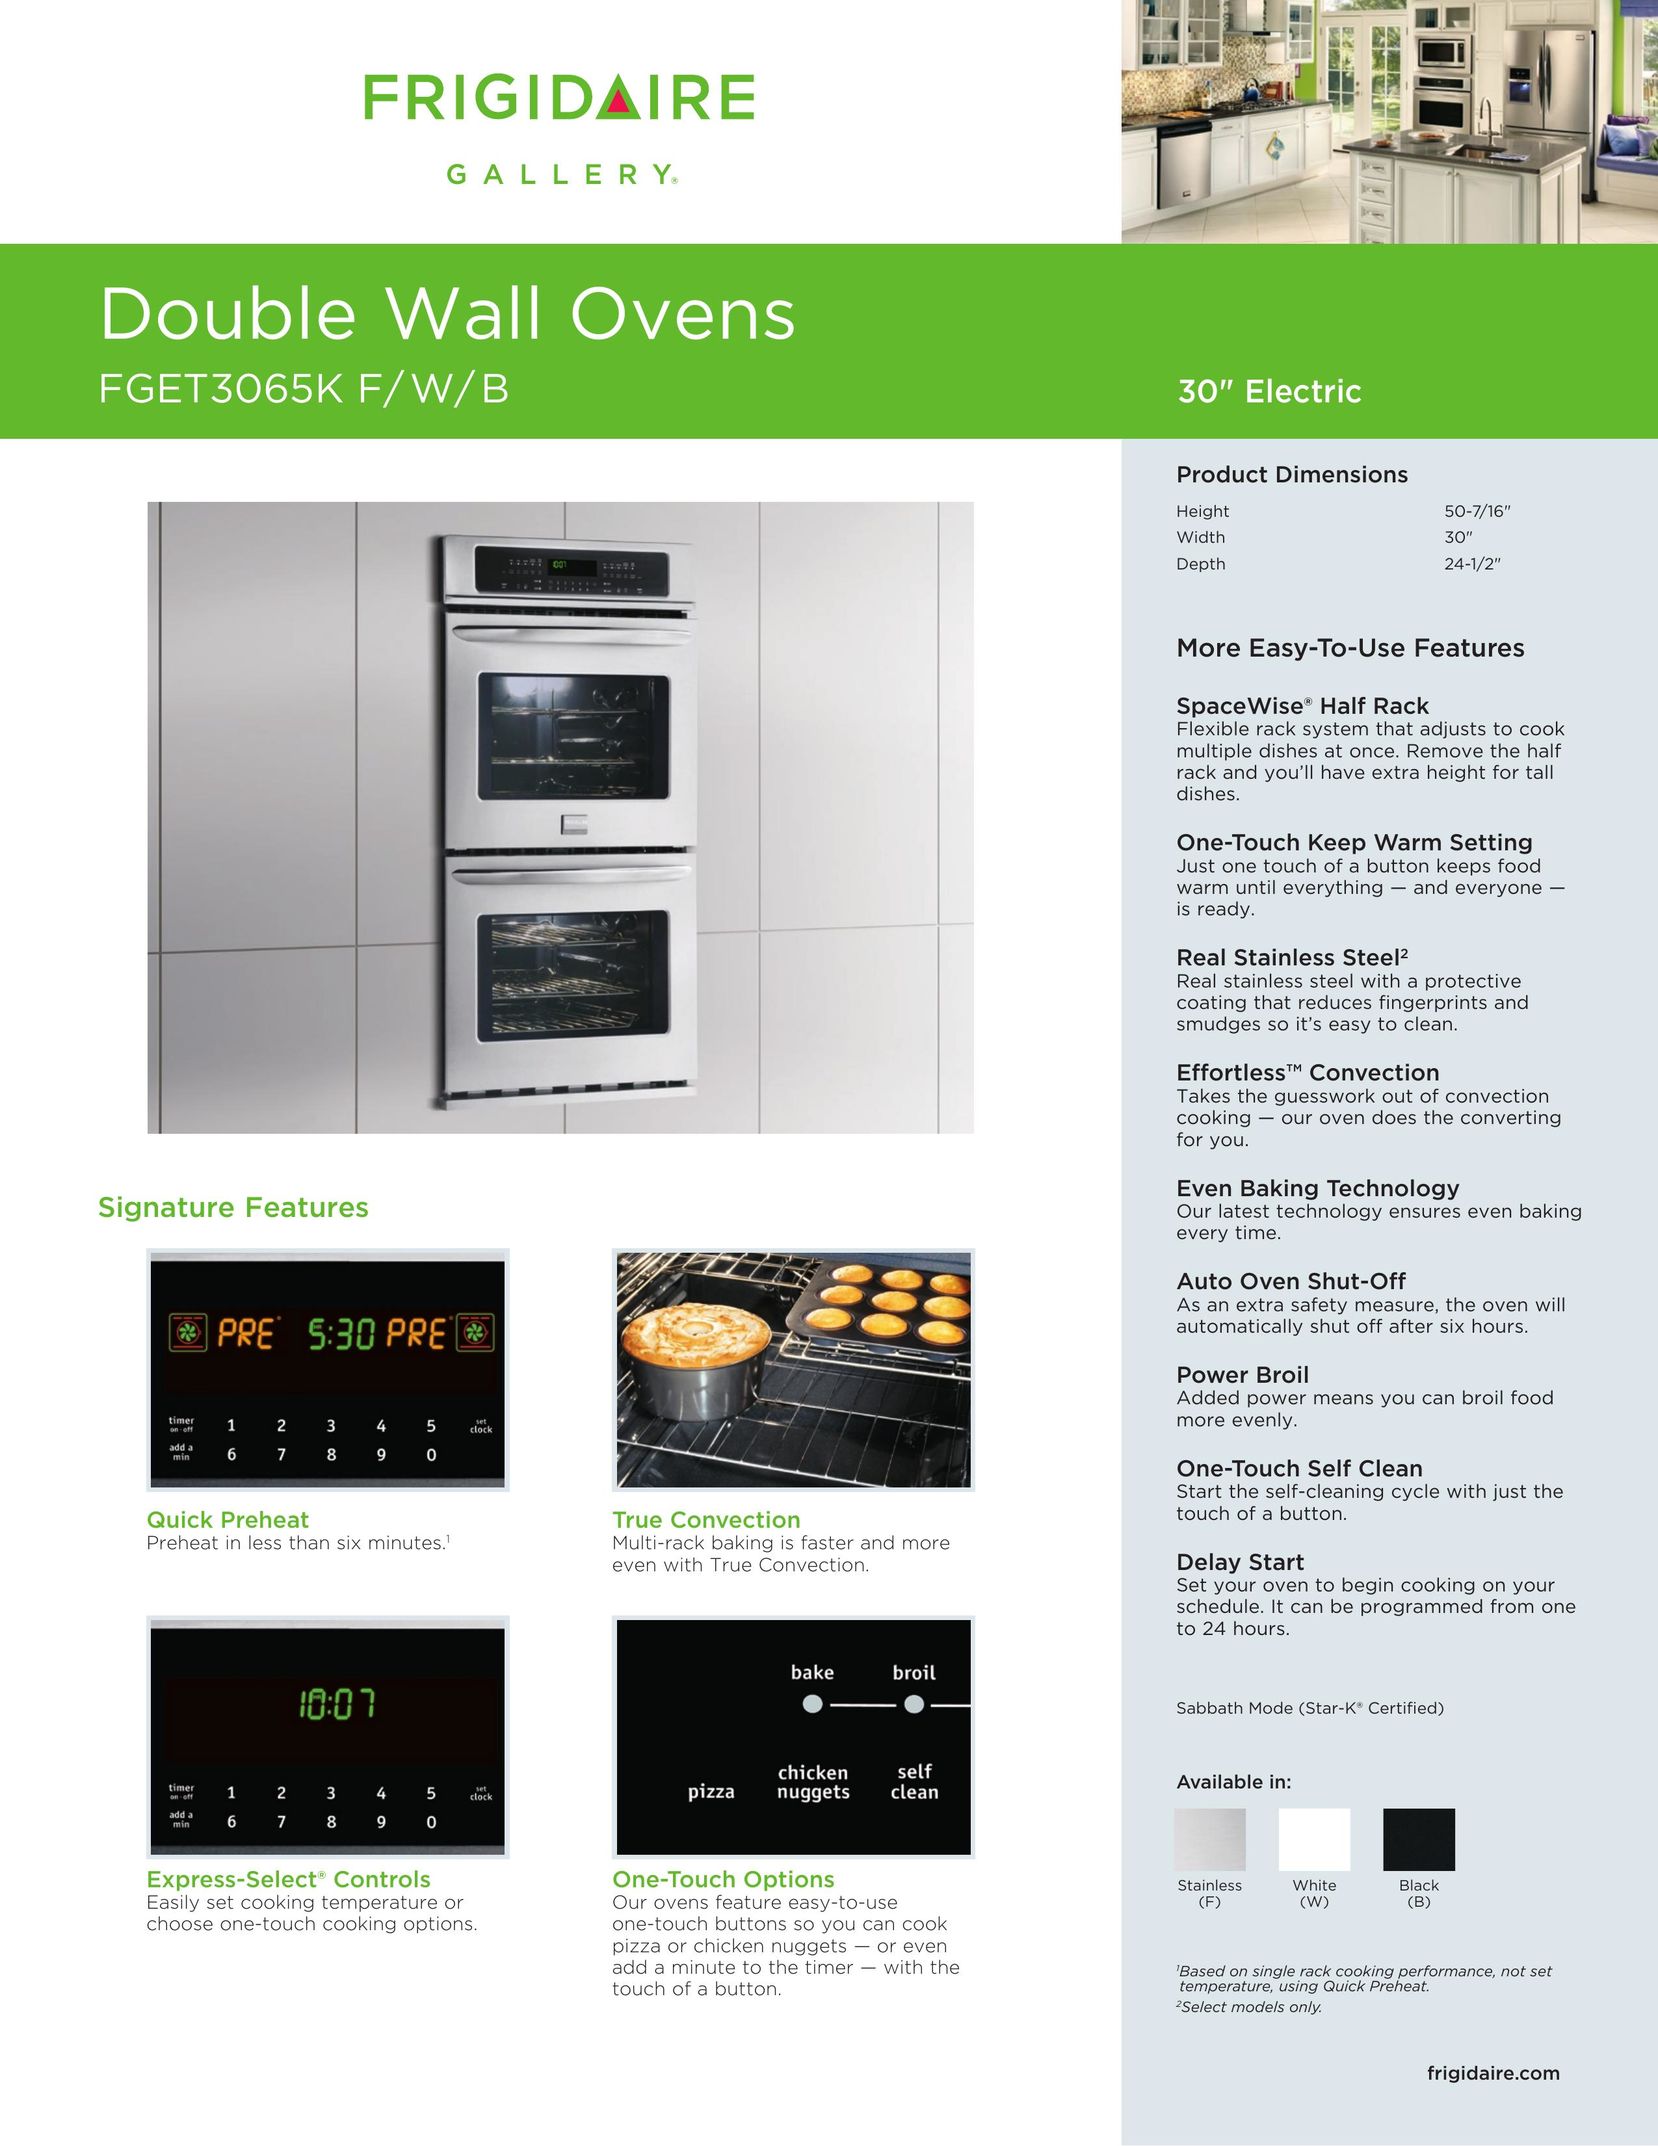 Frigidaire FGET3065K Double Oven User Manual